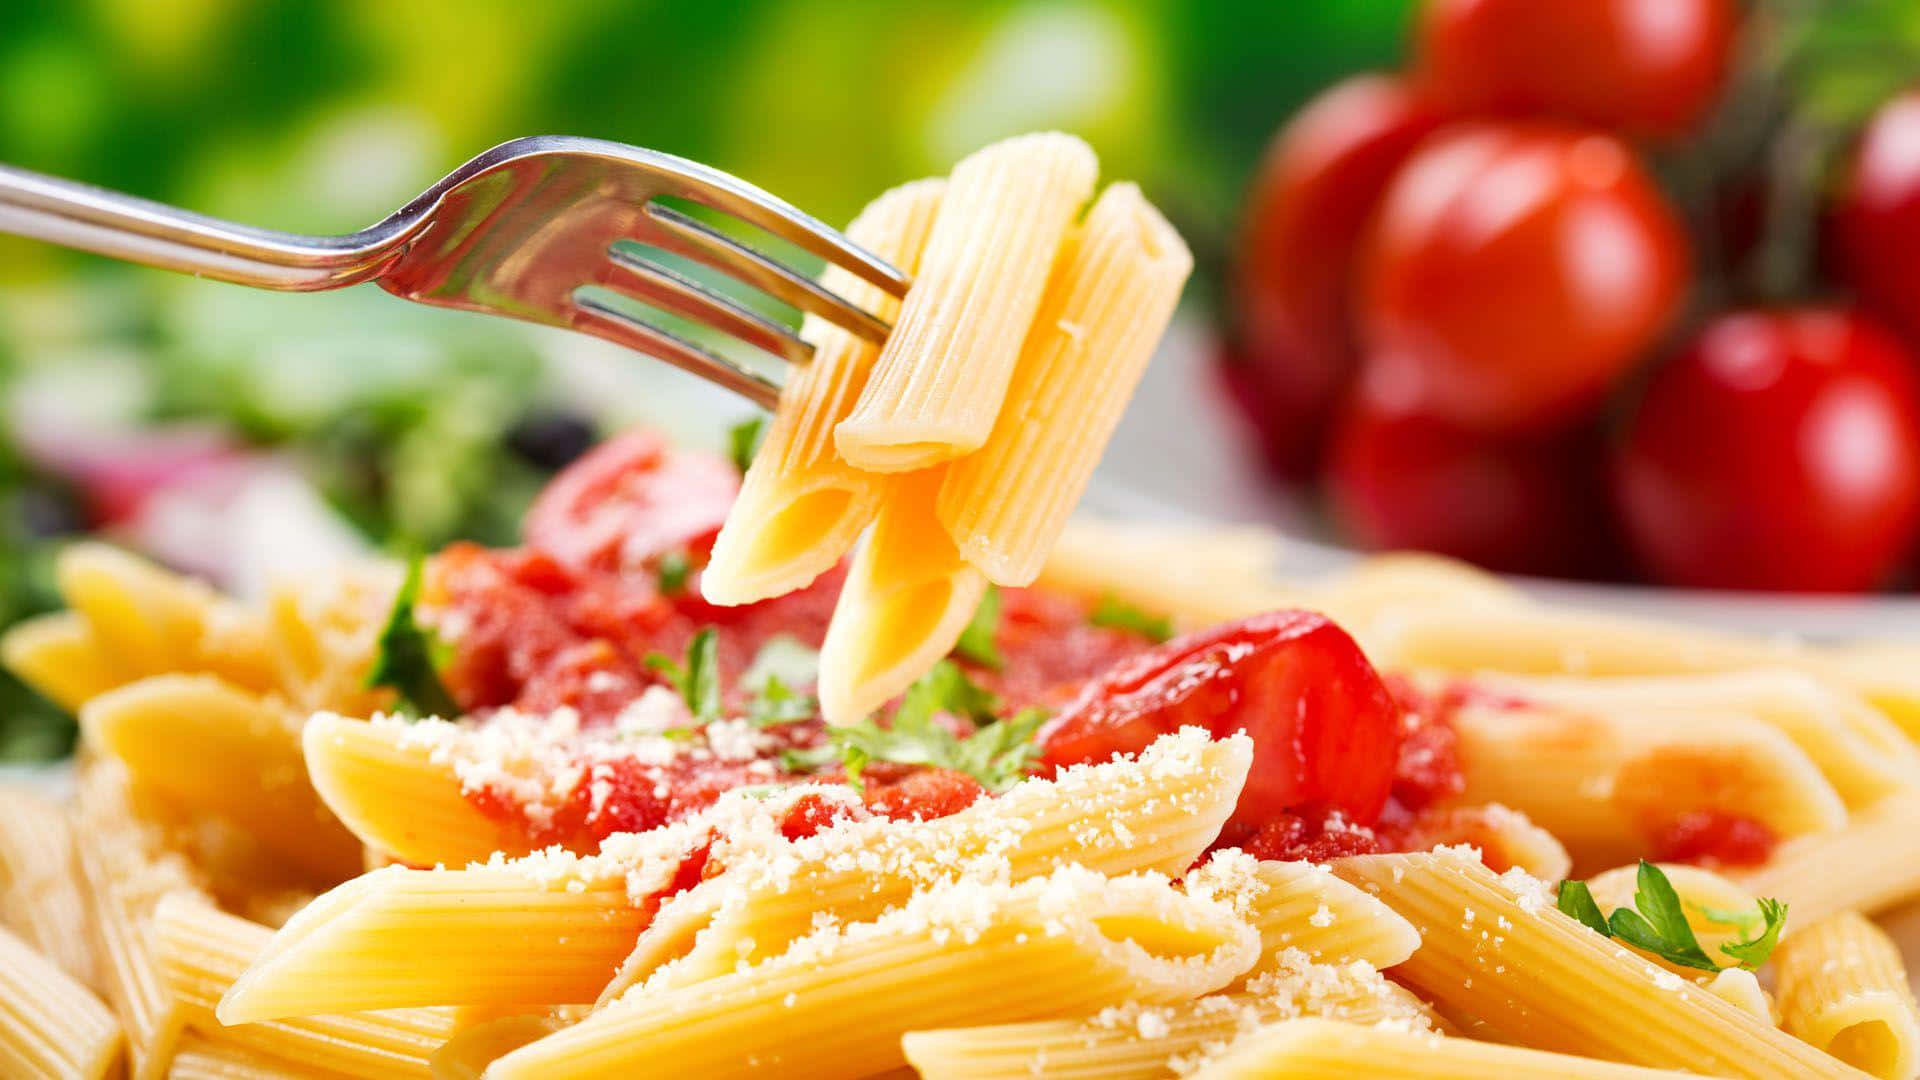 Download Plate of freshly cooked Tagliatelle pasta | Wallpapers.com